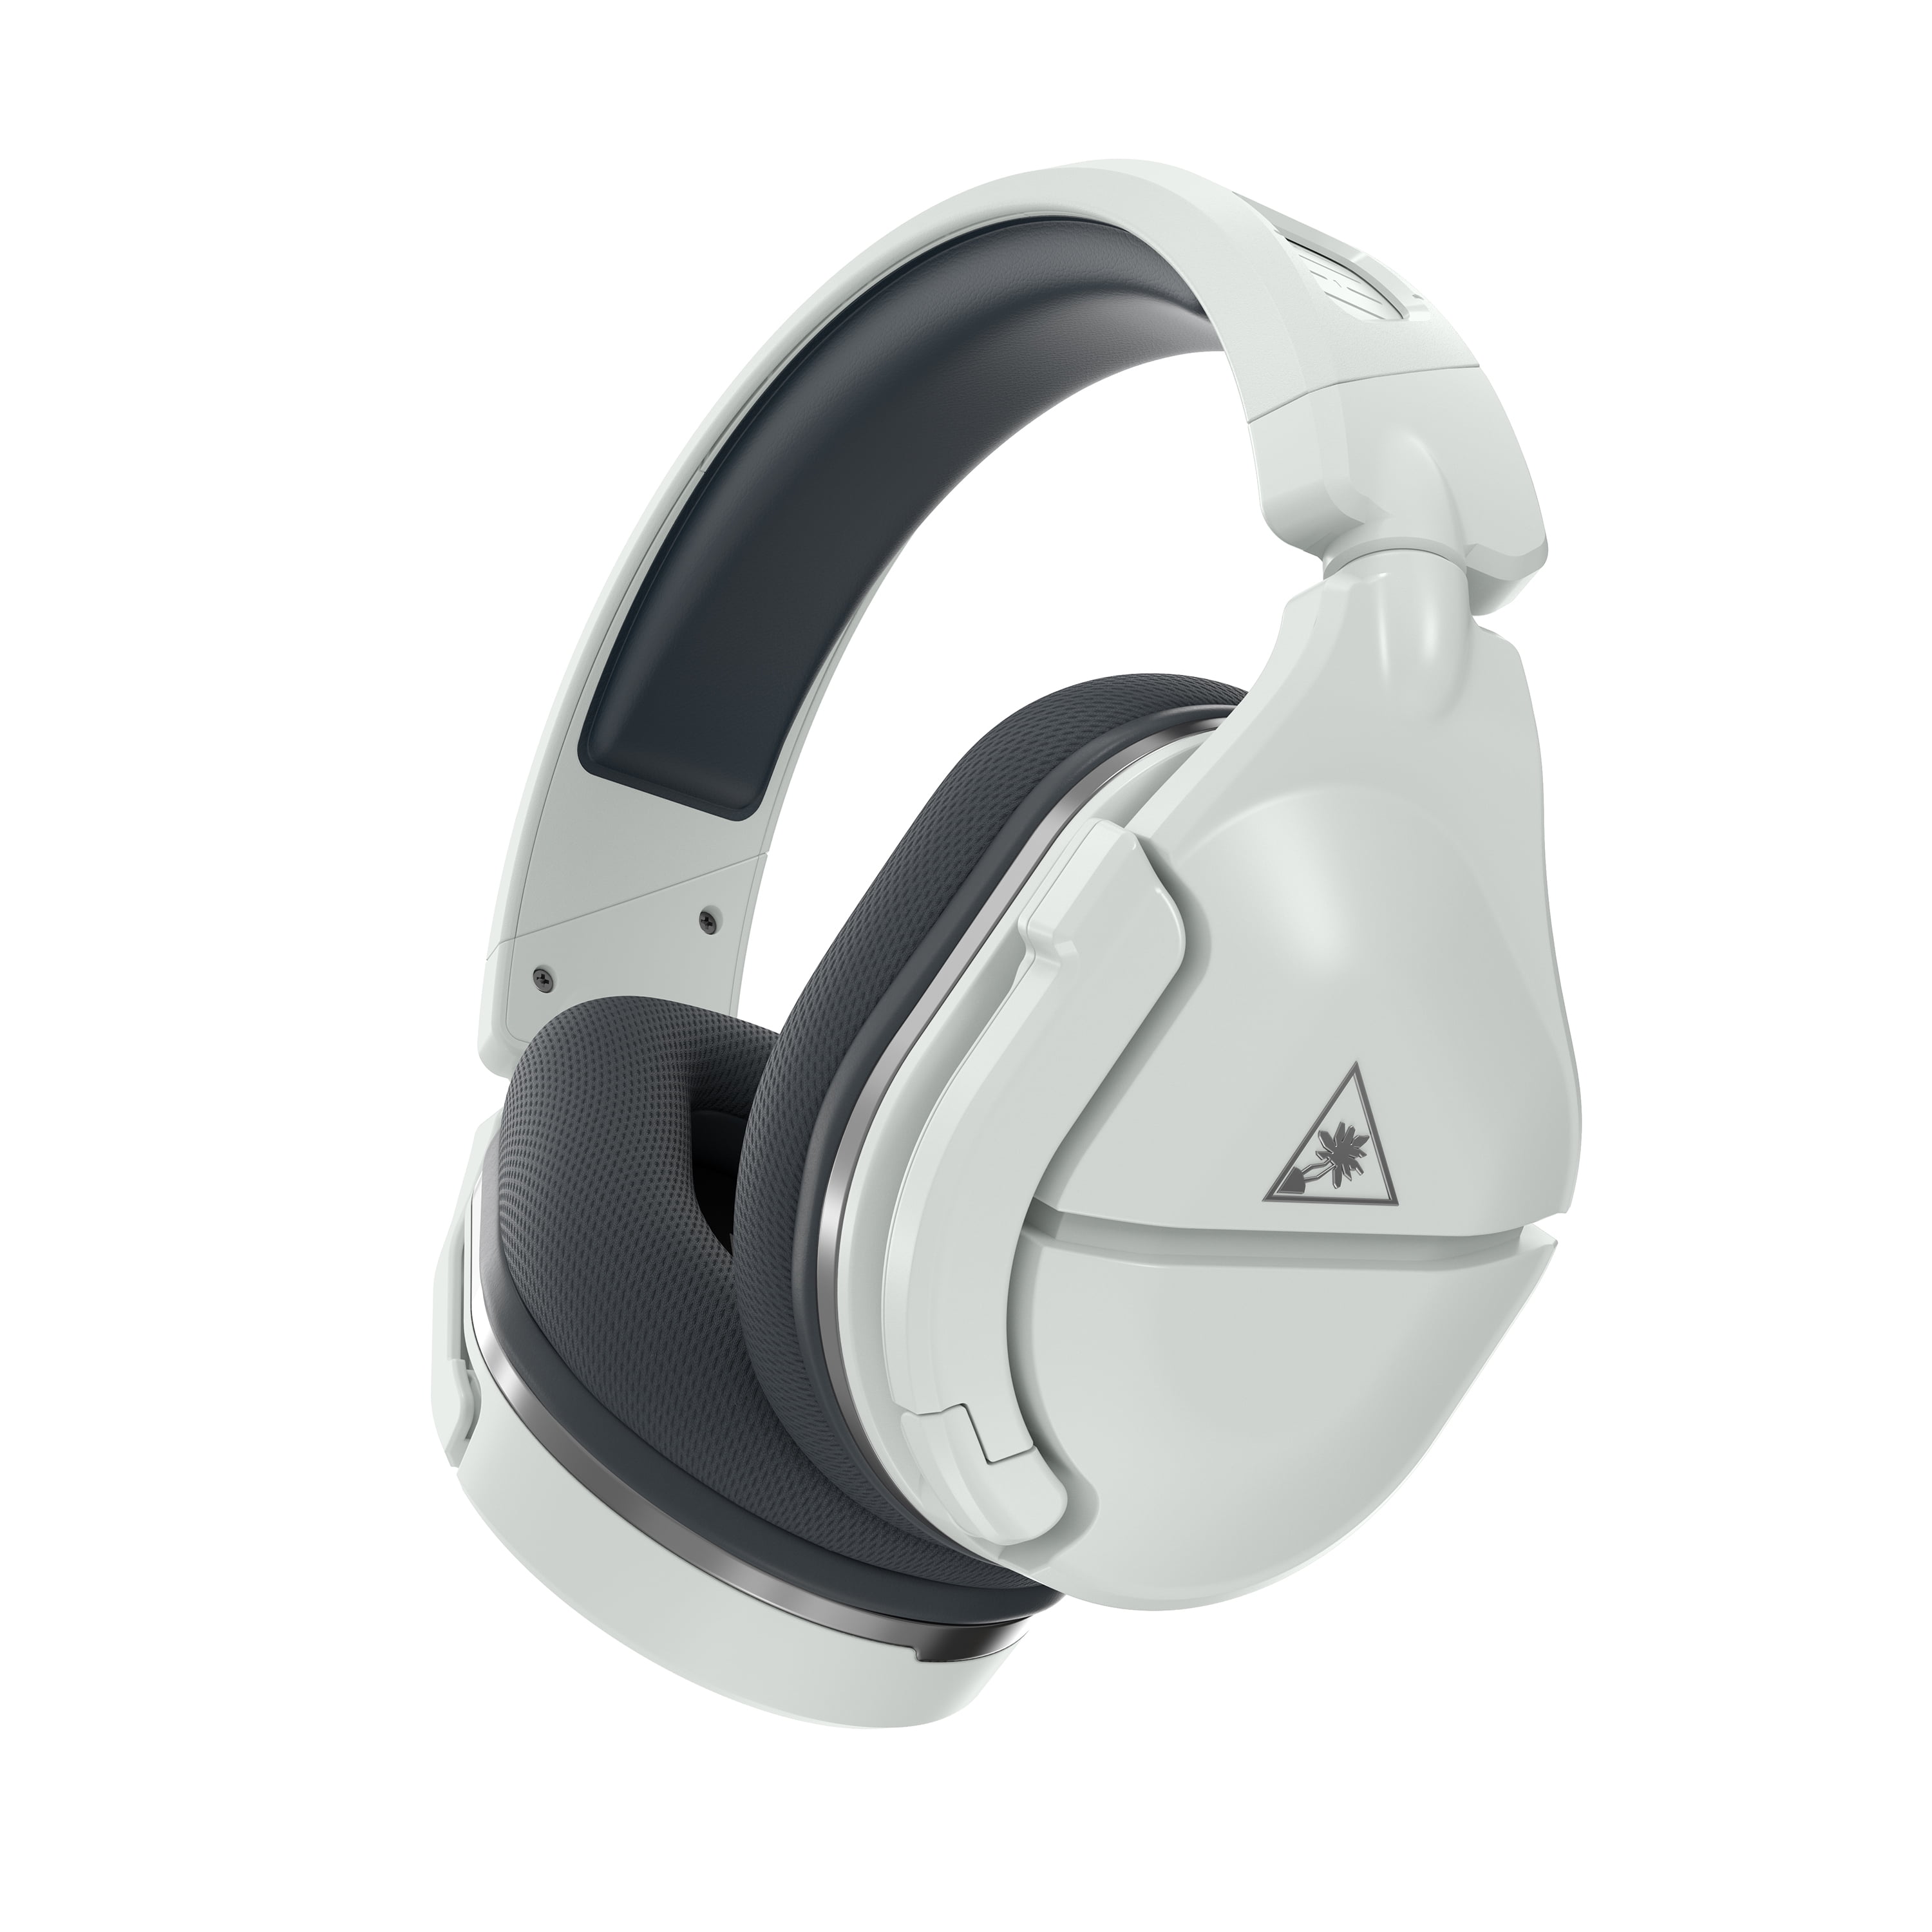 Turtle Beach Stealth 600 Gen 2 Wireless Gaming Headset for PS5, PS4, PS4 Pro, PlayStation, & Nintendo Switch with 50mm Speakers, 15-Hour life, Flip-to-Mute Mic, and Spatial Audio - White -